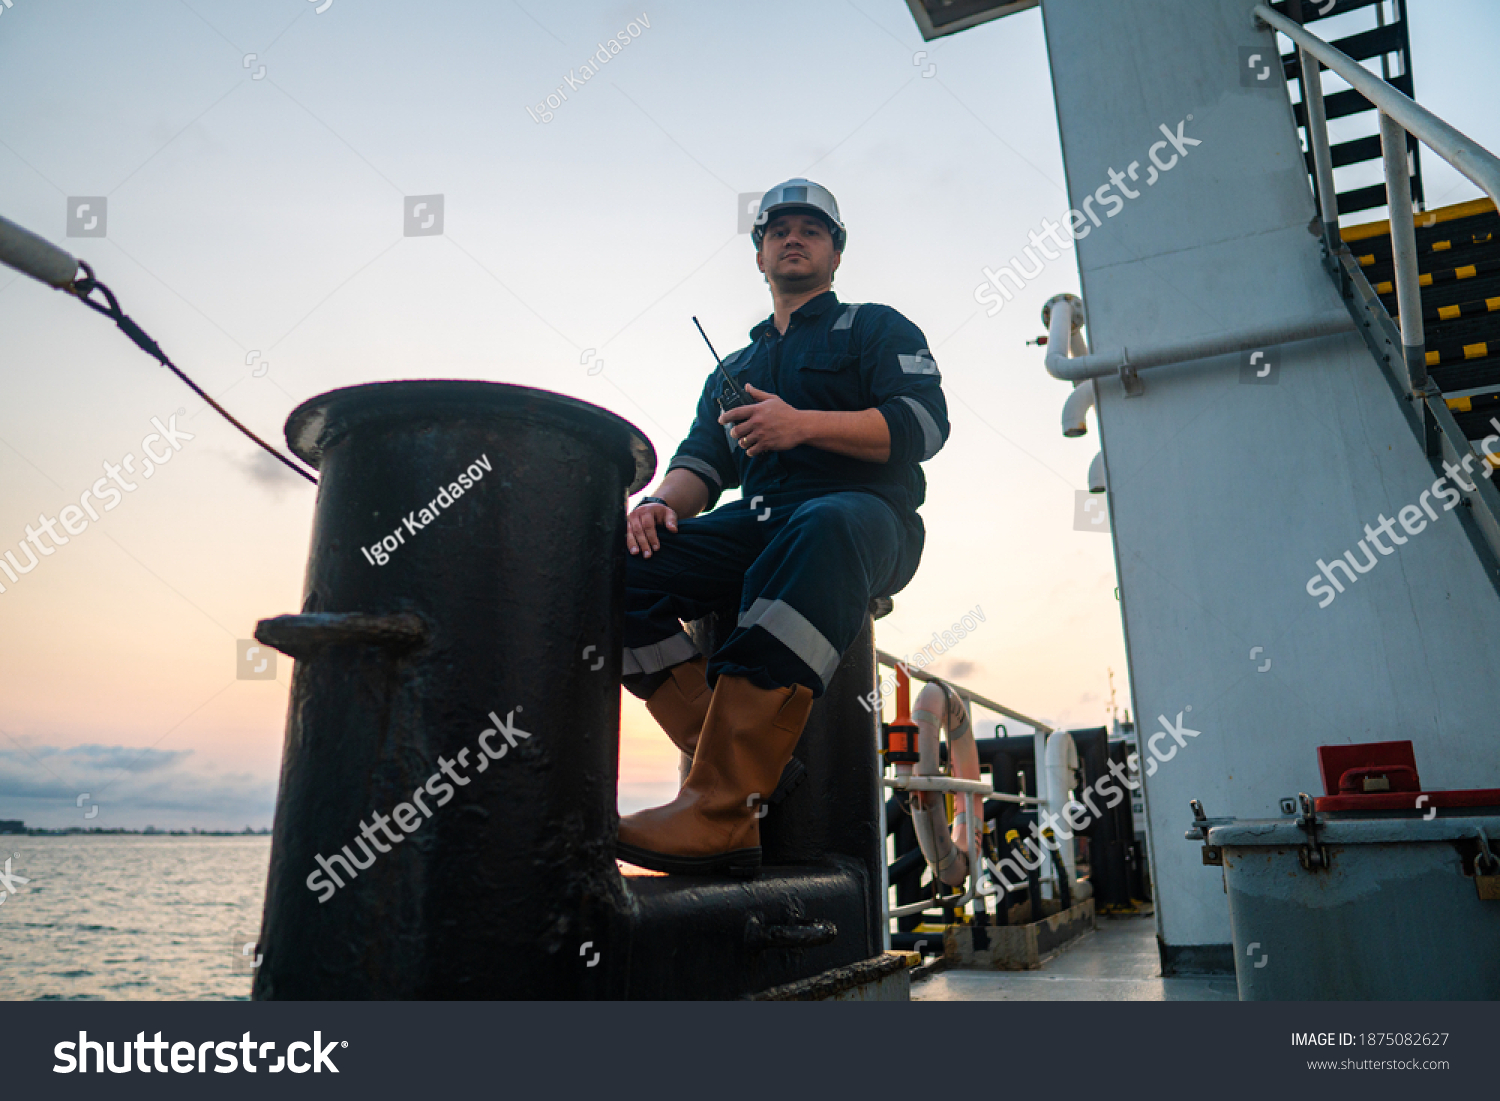 Marine Deck Officer or Chief mate on deck of offshore vessel or ship , wearing PPE personal protective equipment - helmet, coverall. Ship is on background #1875082627